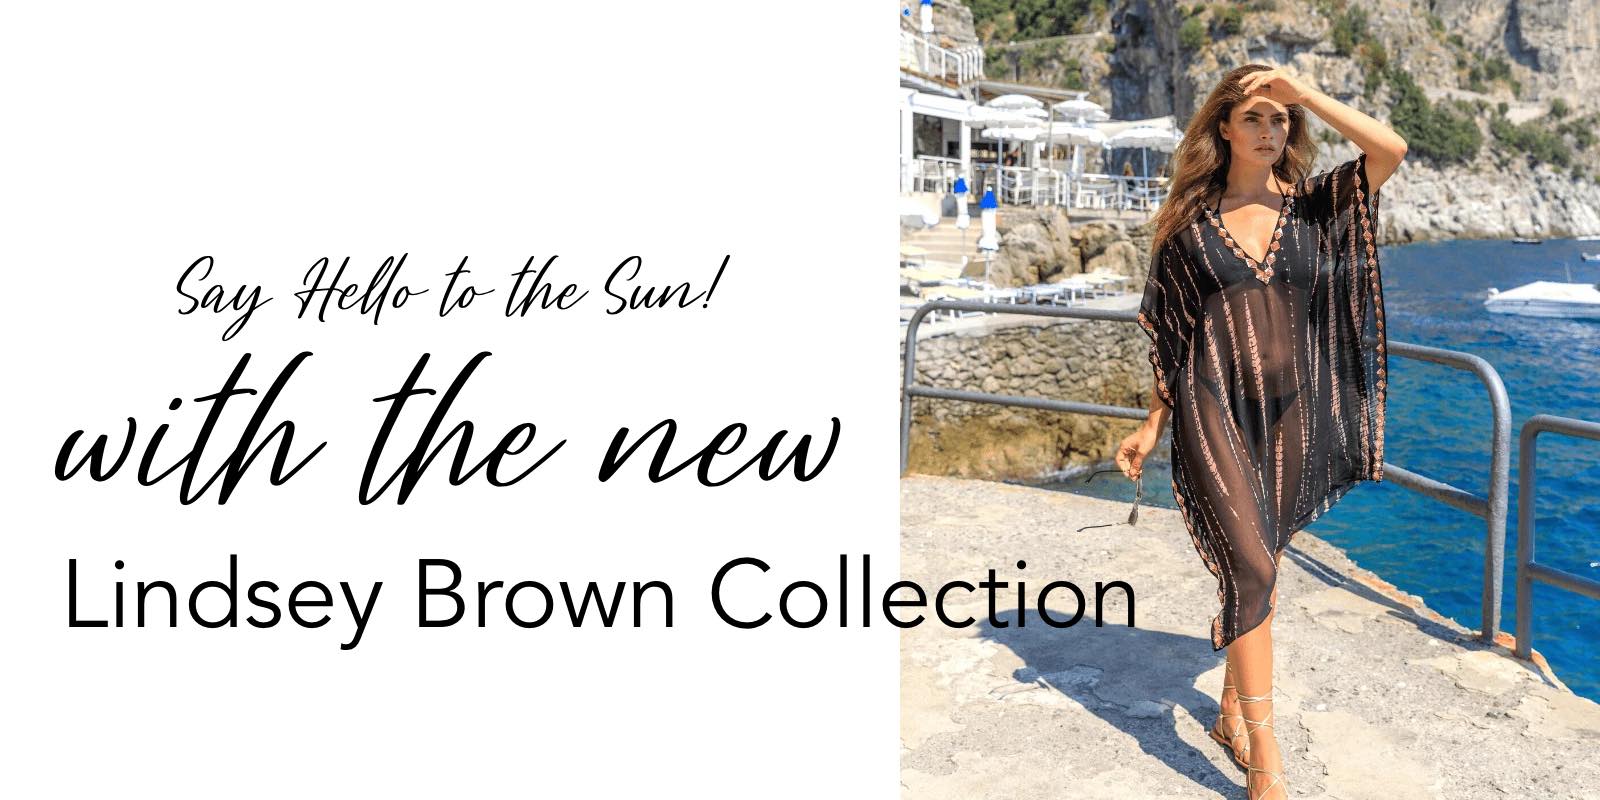 Hello Sun - the New Lindsay Brown Collection is here!